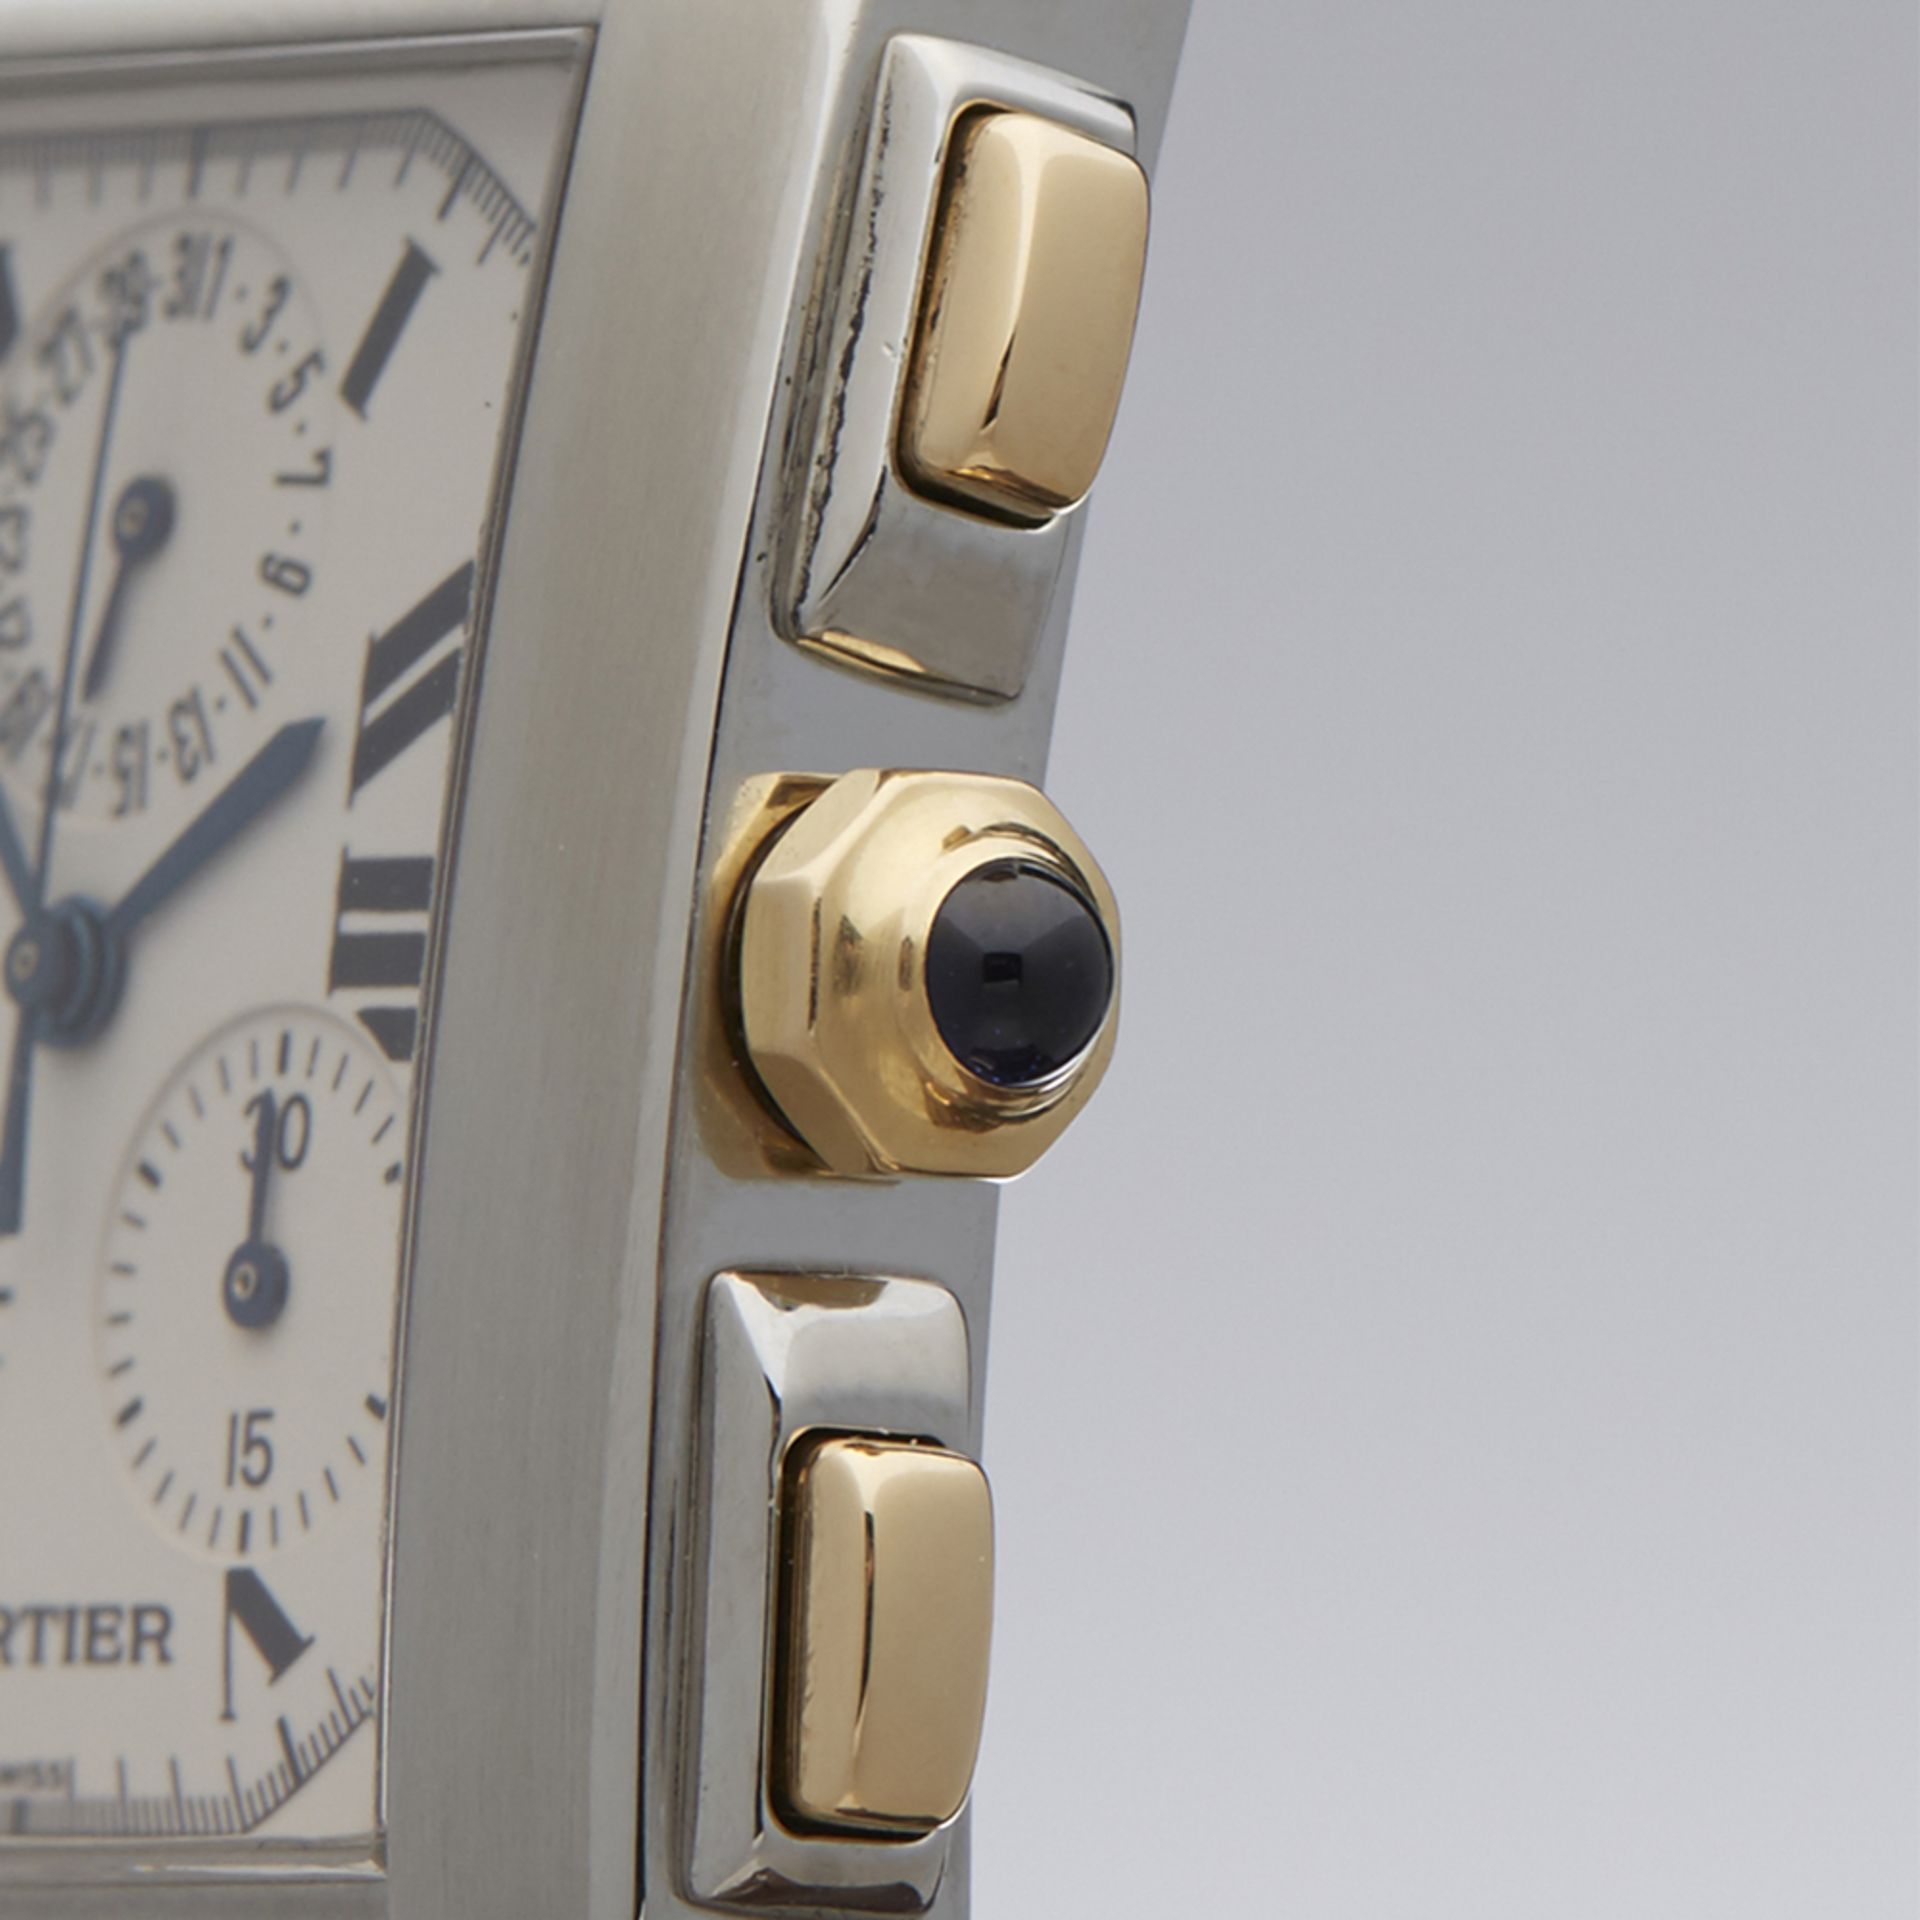 Cartier, Tank Francaise Chronoreflex 28mm Stainless Steel & 18k Yellow Gold 2303 or W51004Q4 - Image 4 of 9